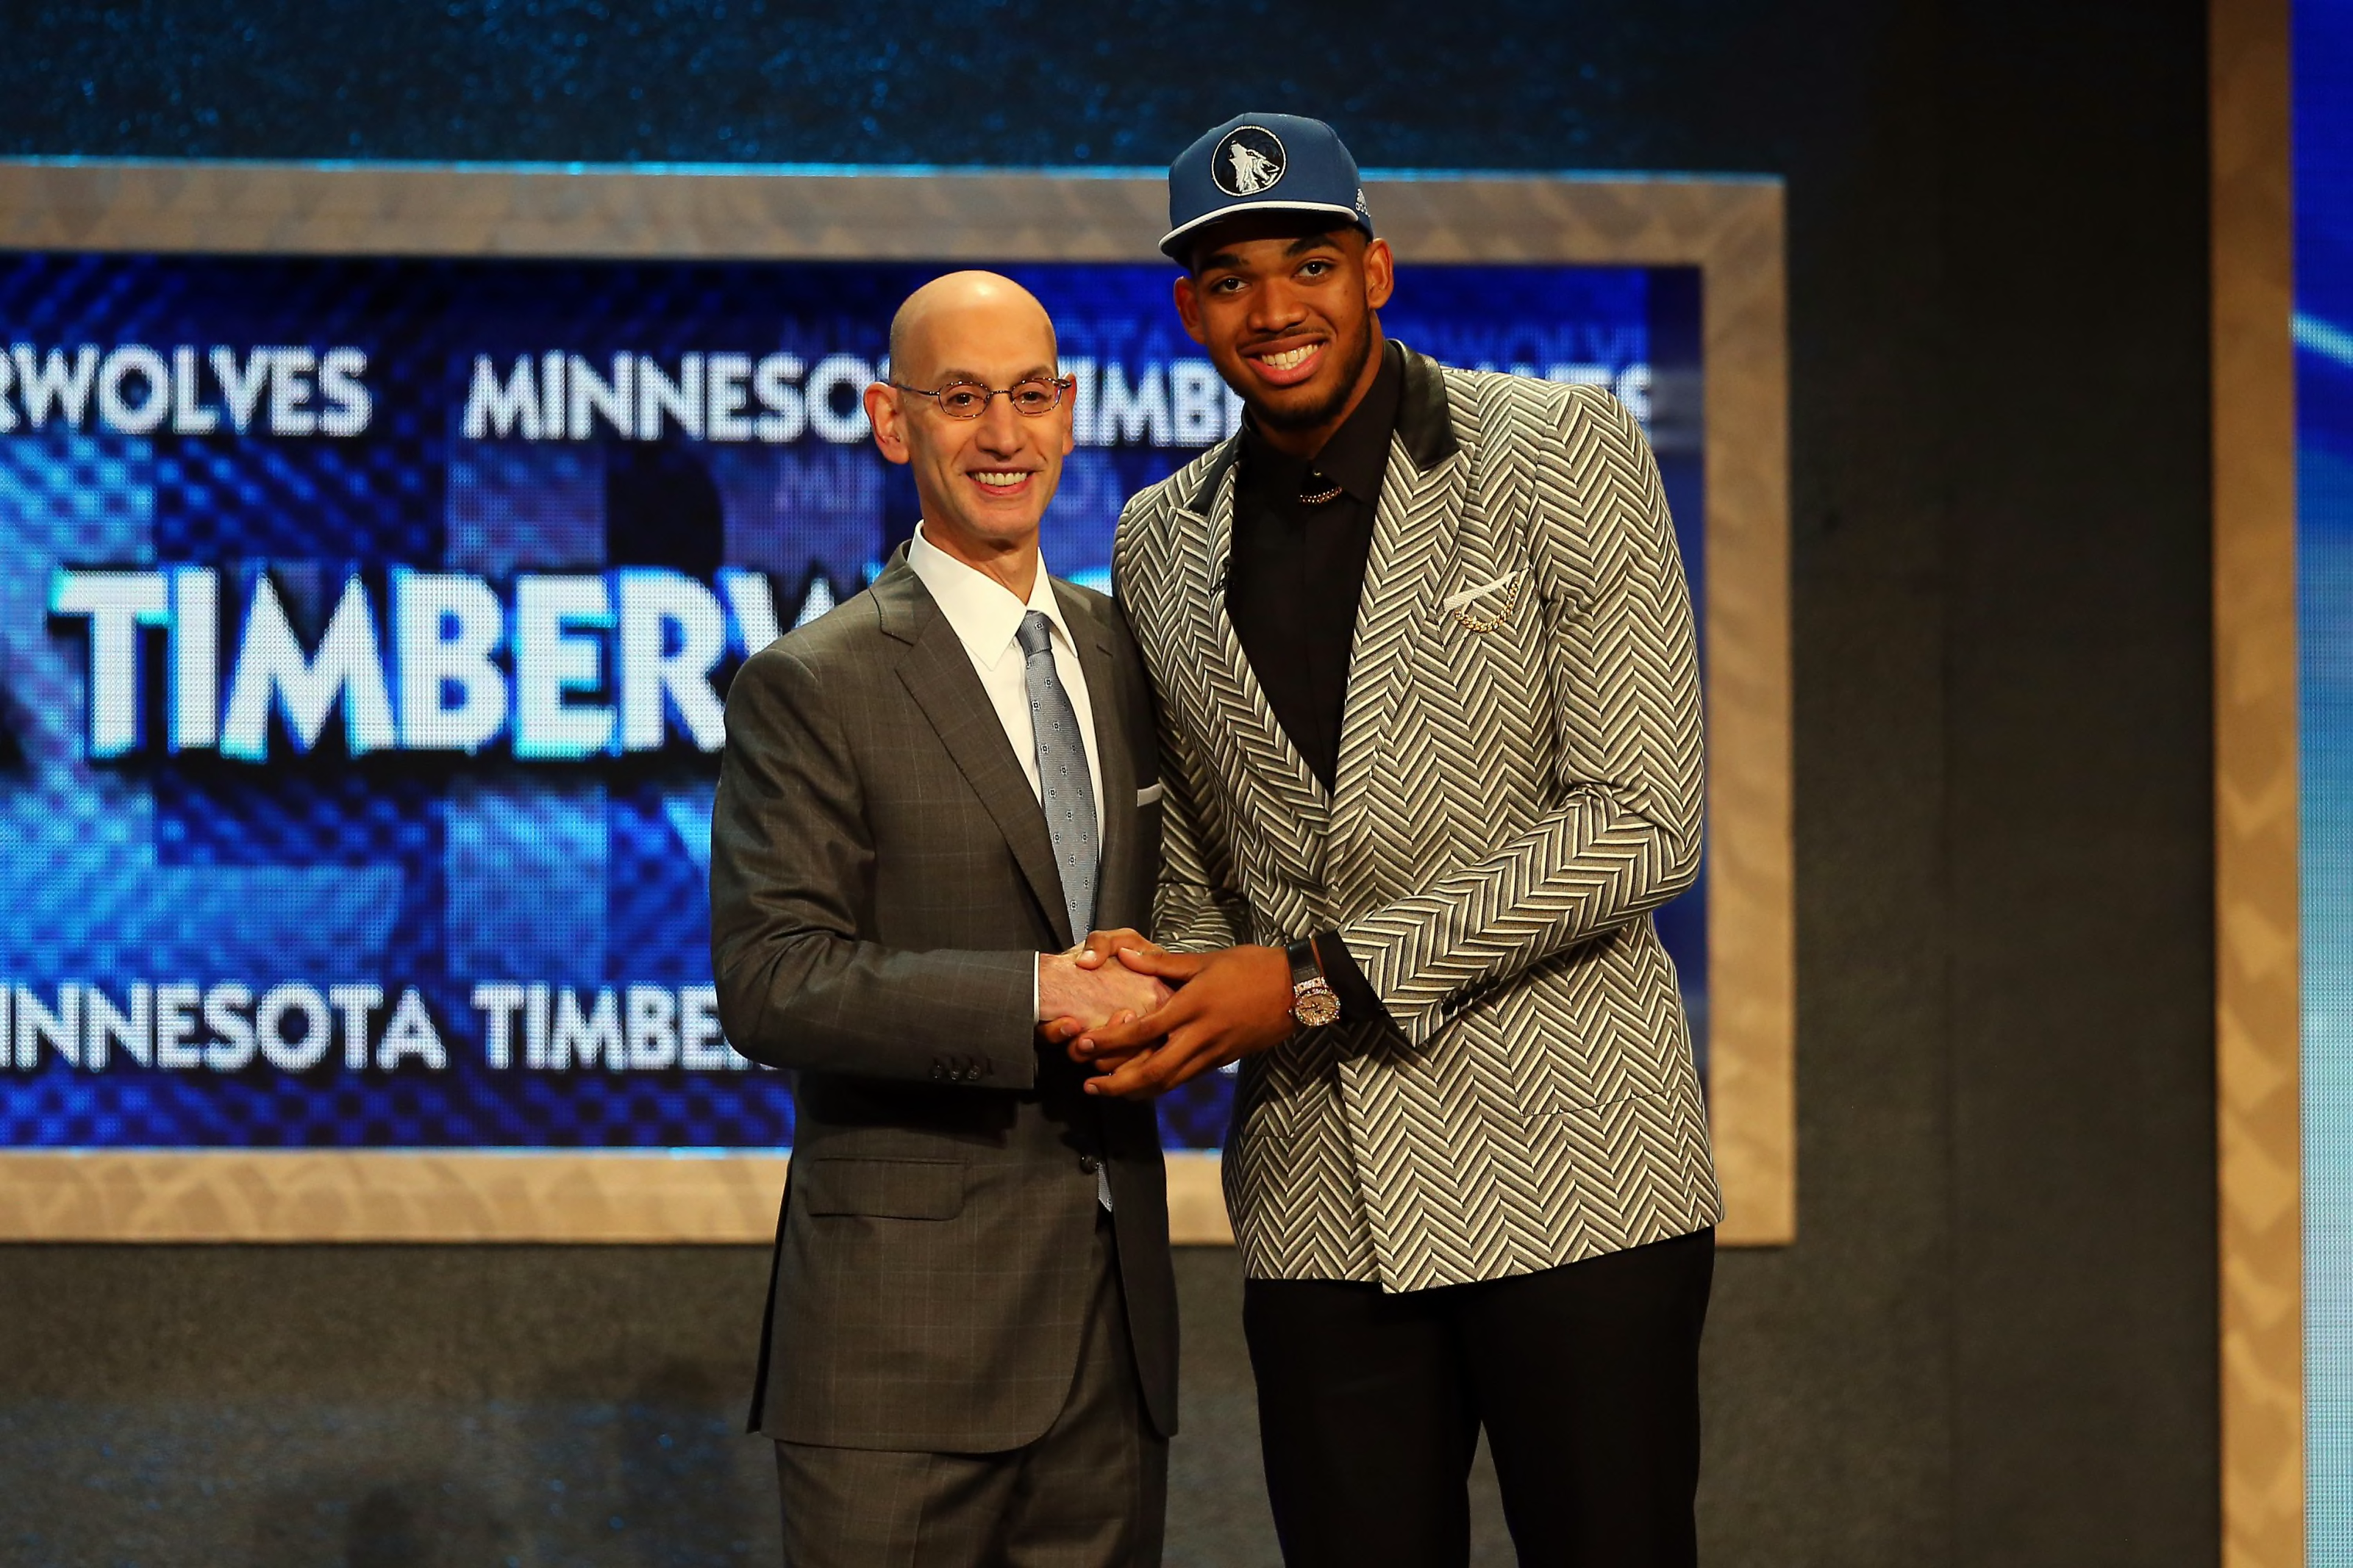 Minnesota Timberwolves: History of the No. 1 pick in the NBA Draft